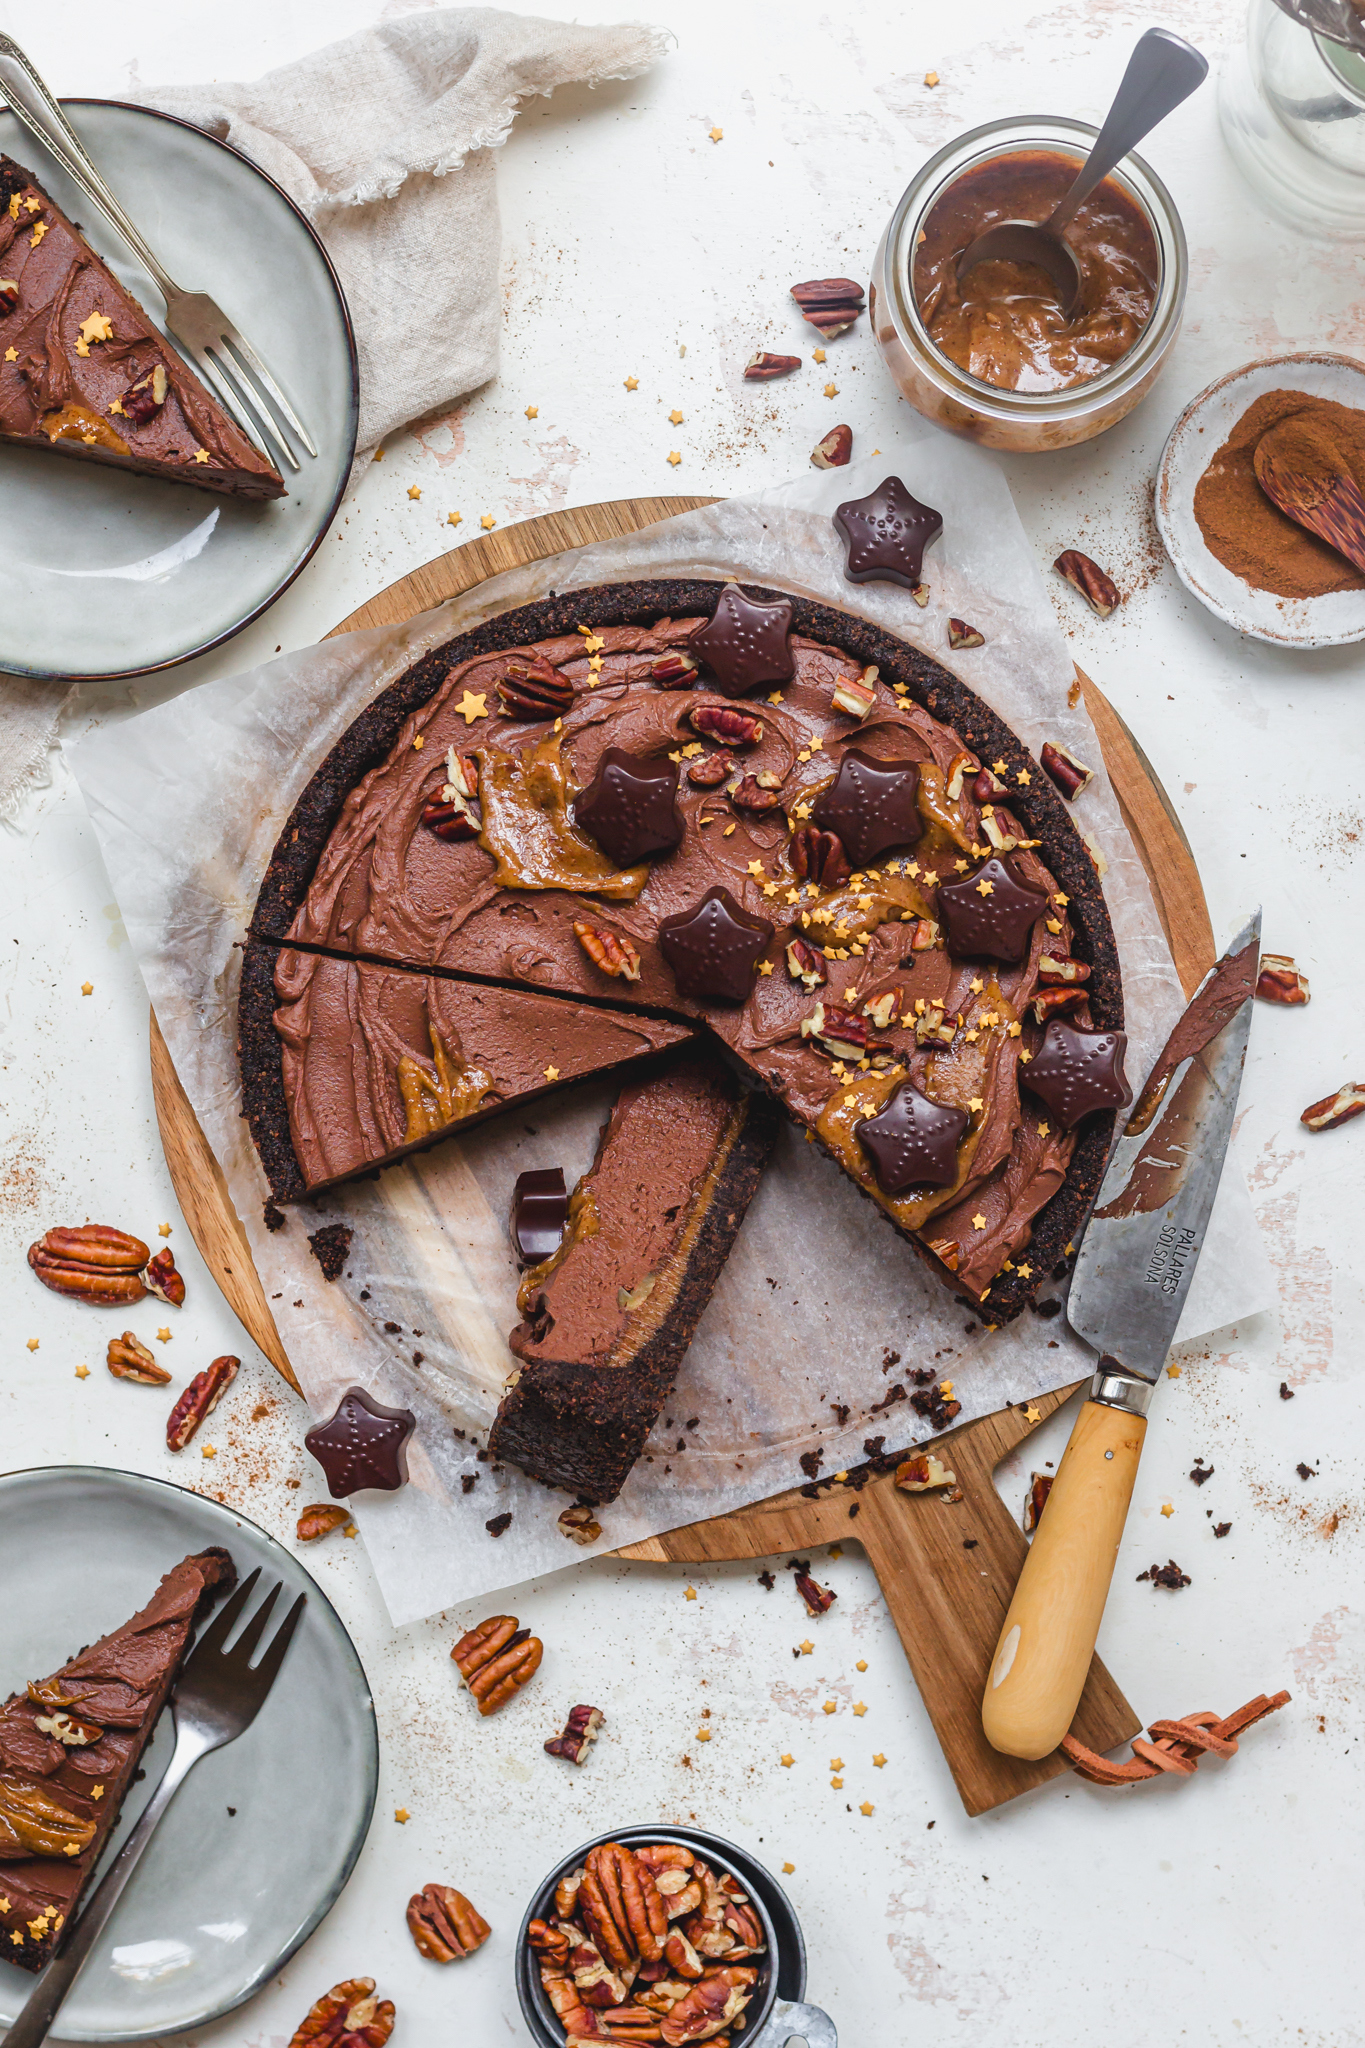 A Chocolate Pecan Caramel Cheesecake with slices removed